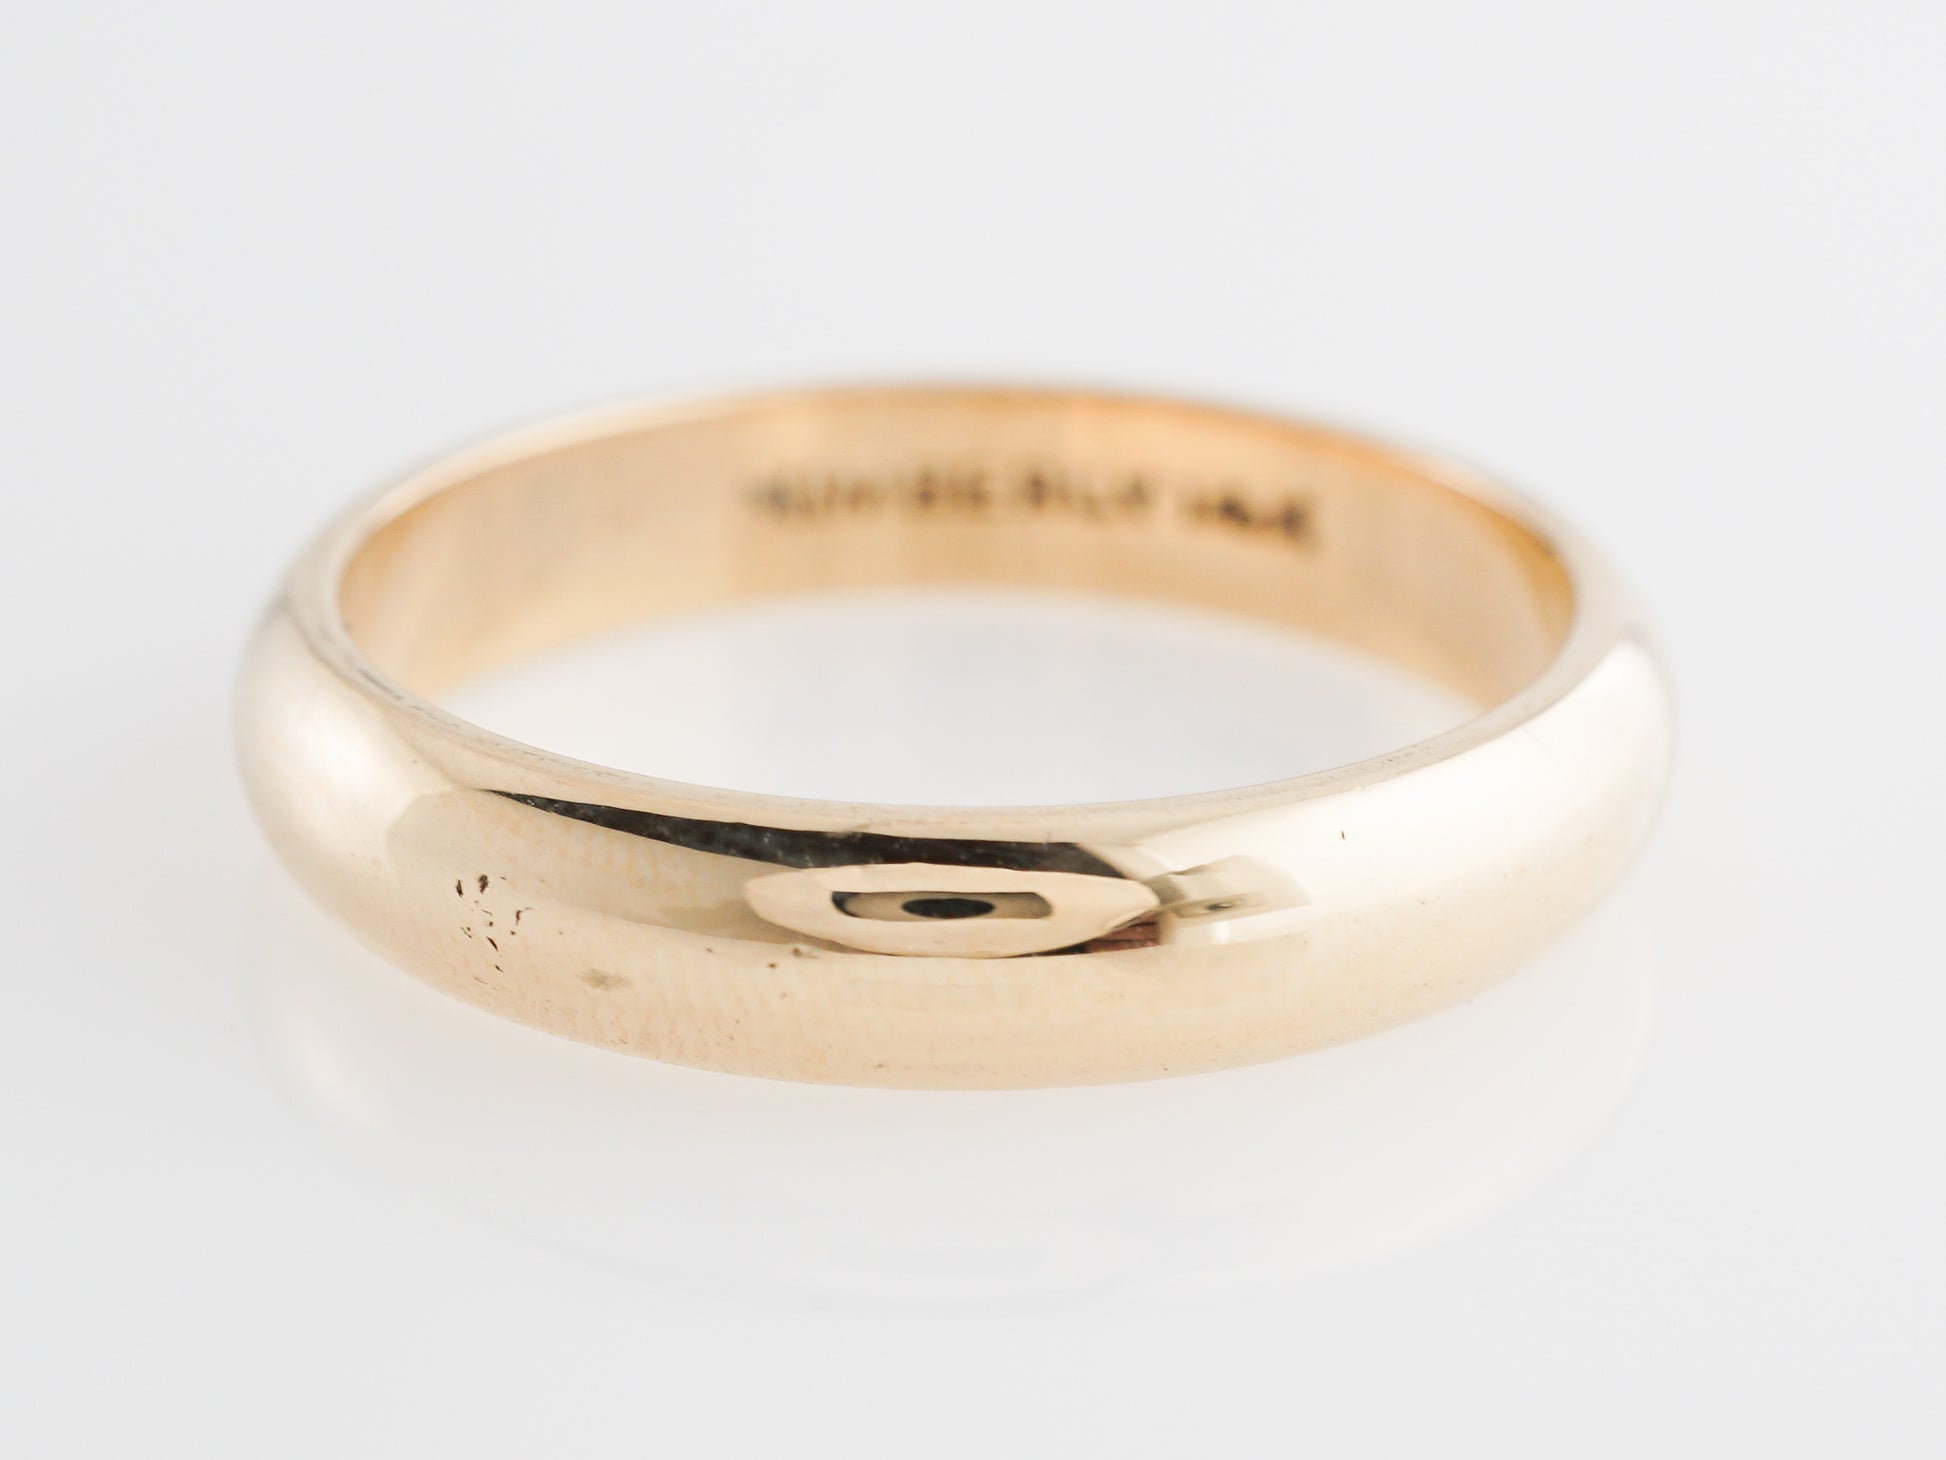 4mm Simple Wedding Band in 14k Yellow GoldComposition: Platinum Ring Size: 7.75 Total Gram Weight: 3.7 g Inscription: 14k
      